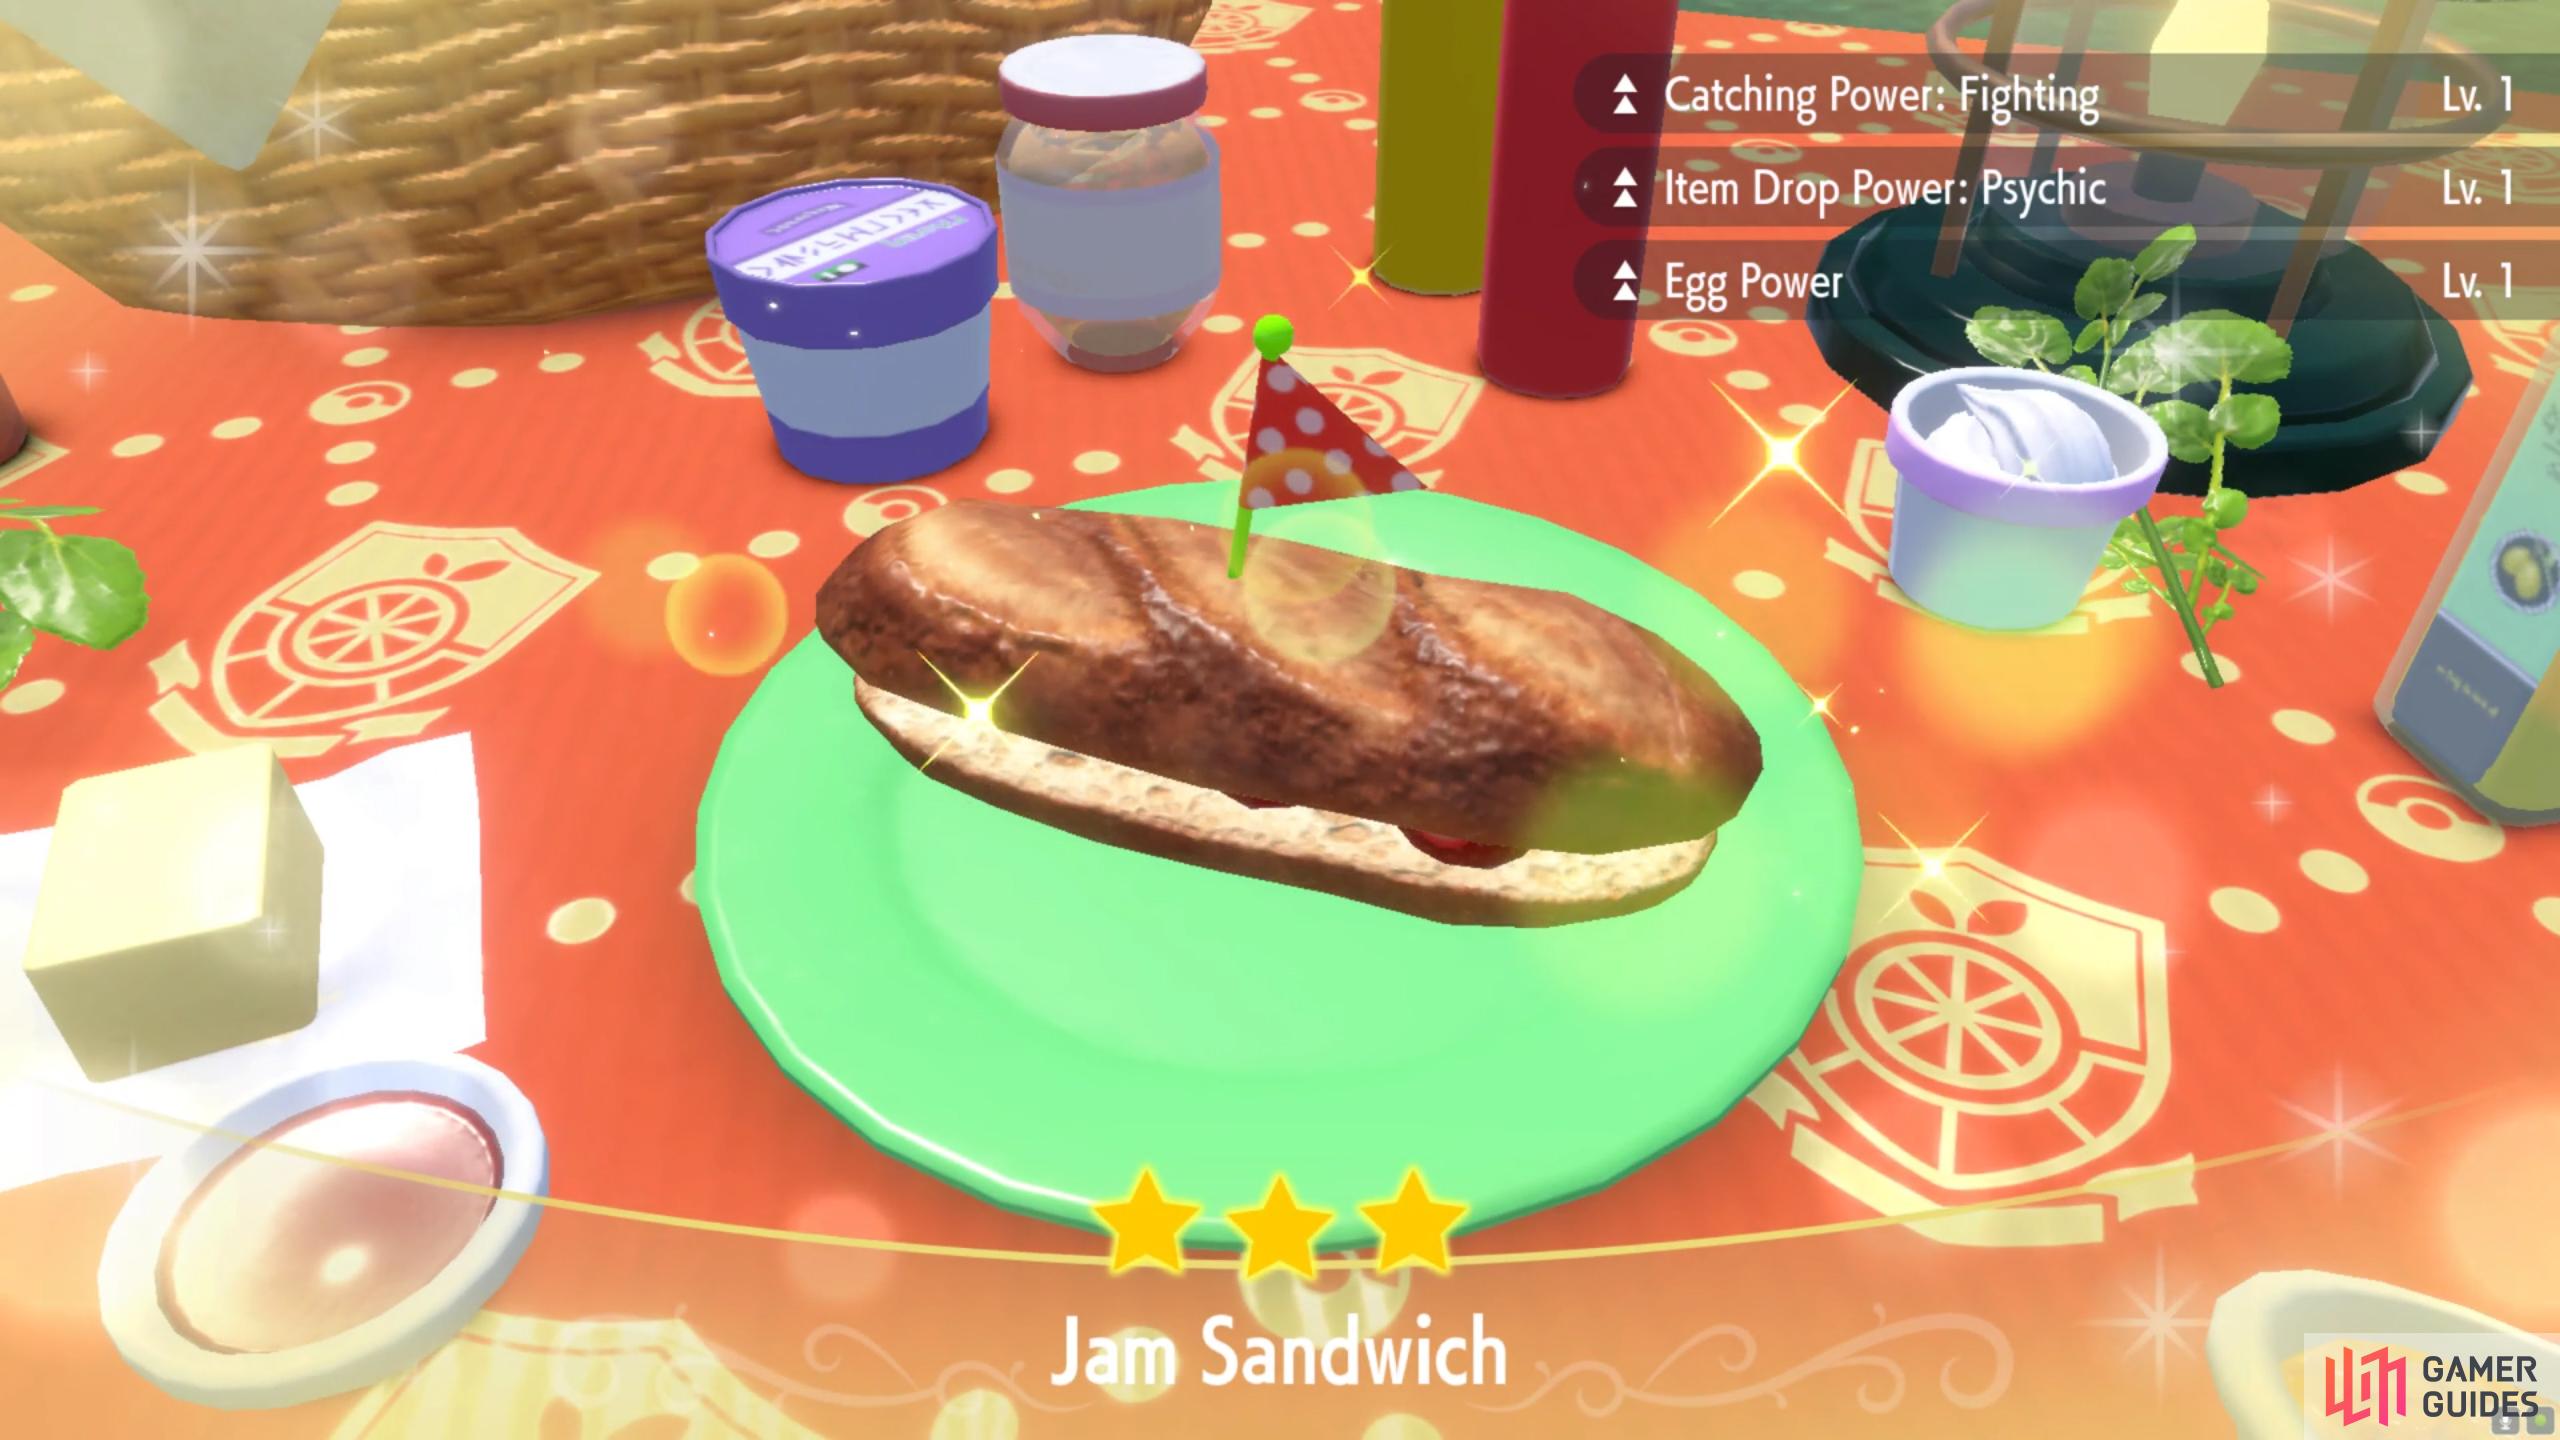 You can create your own sandwiches with Meal Powers.